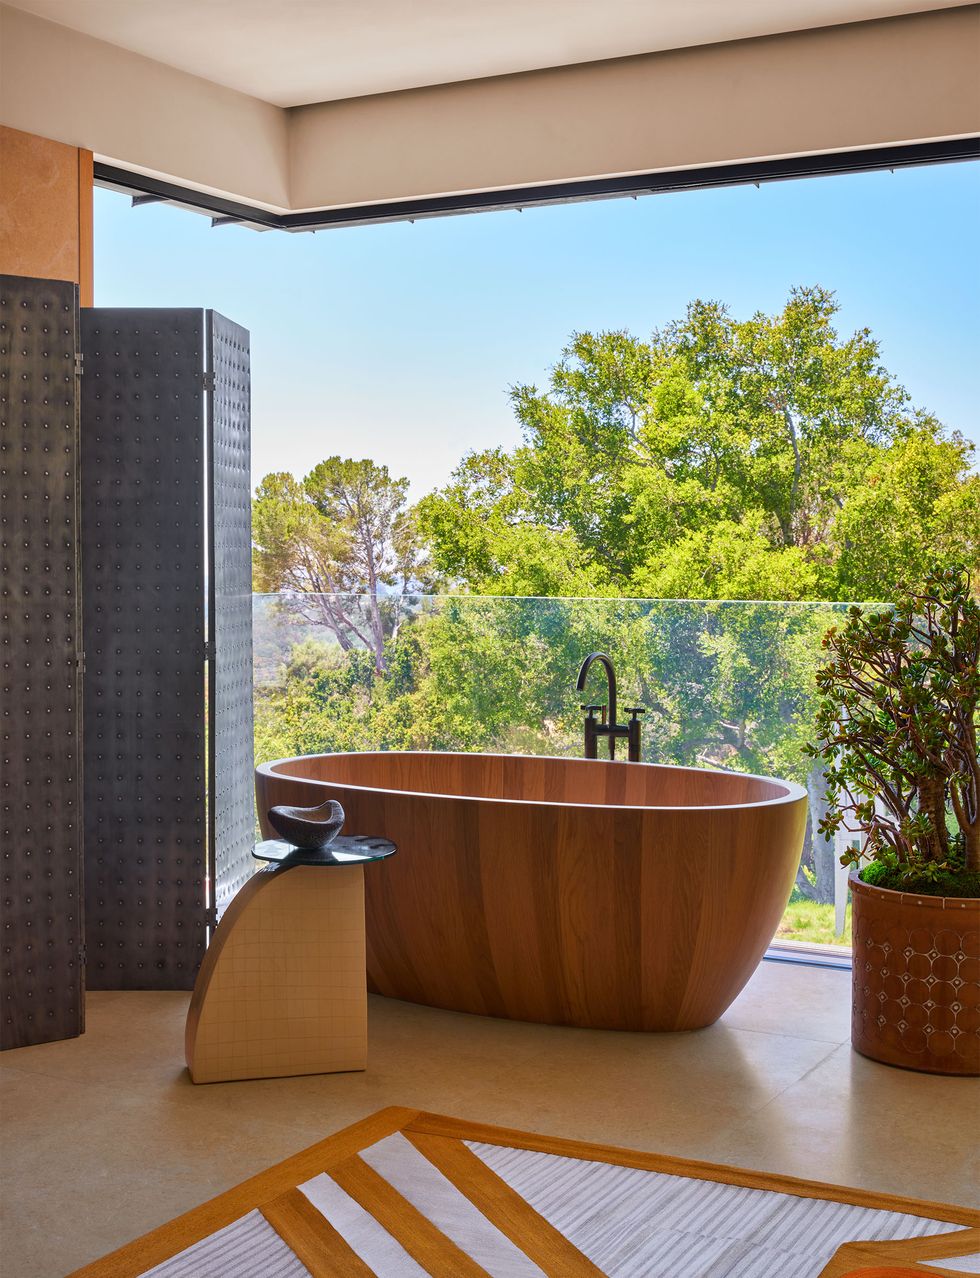 in a primary bathroom with a glass bottom wall and open top is an aluminum folding screen, a ceramic side table next to an oak barrel bathtub, a large ceramic planter, and a light rug with terracotta stripes